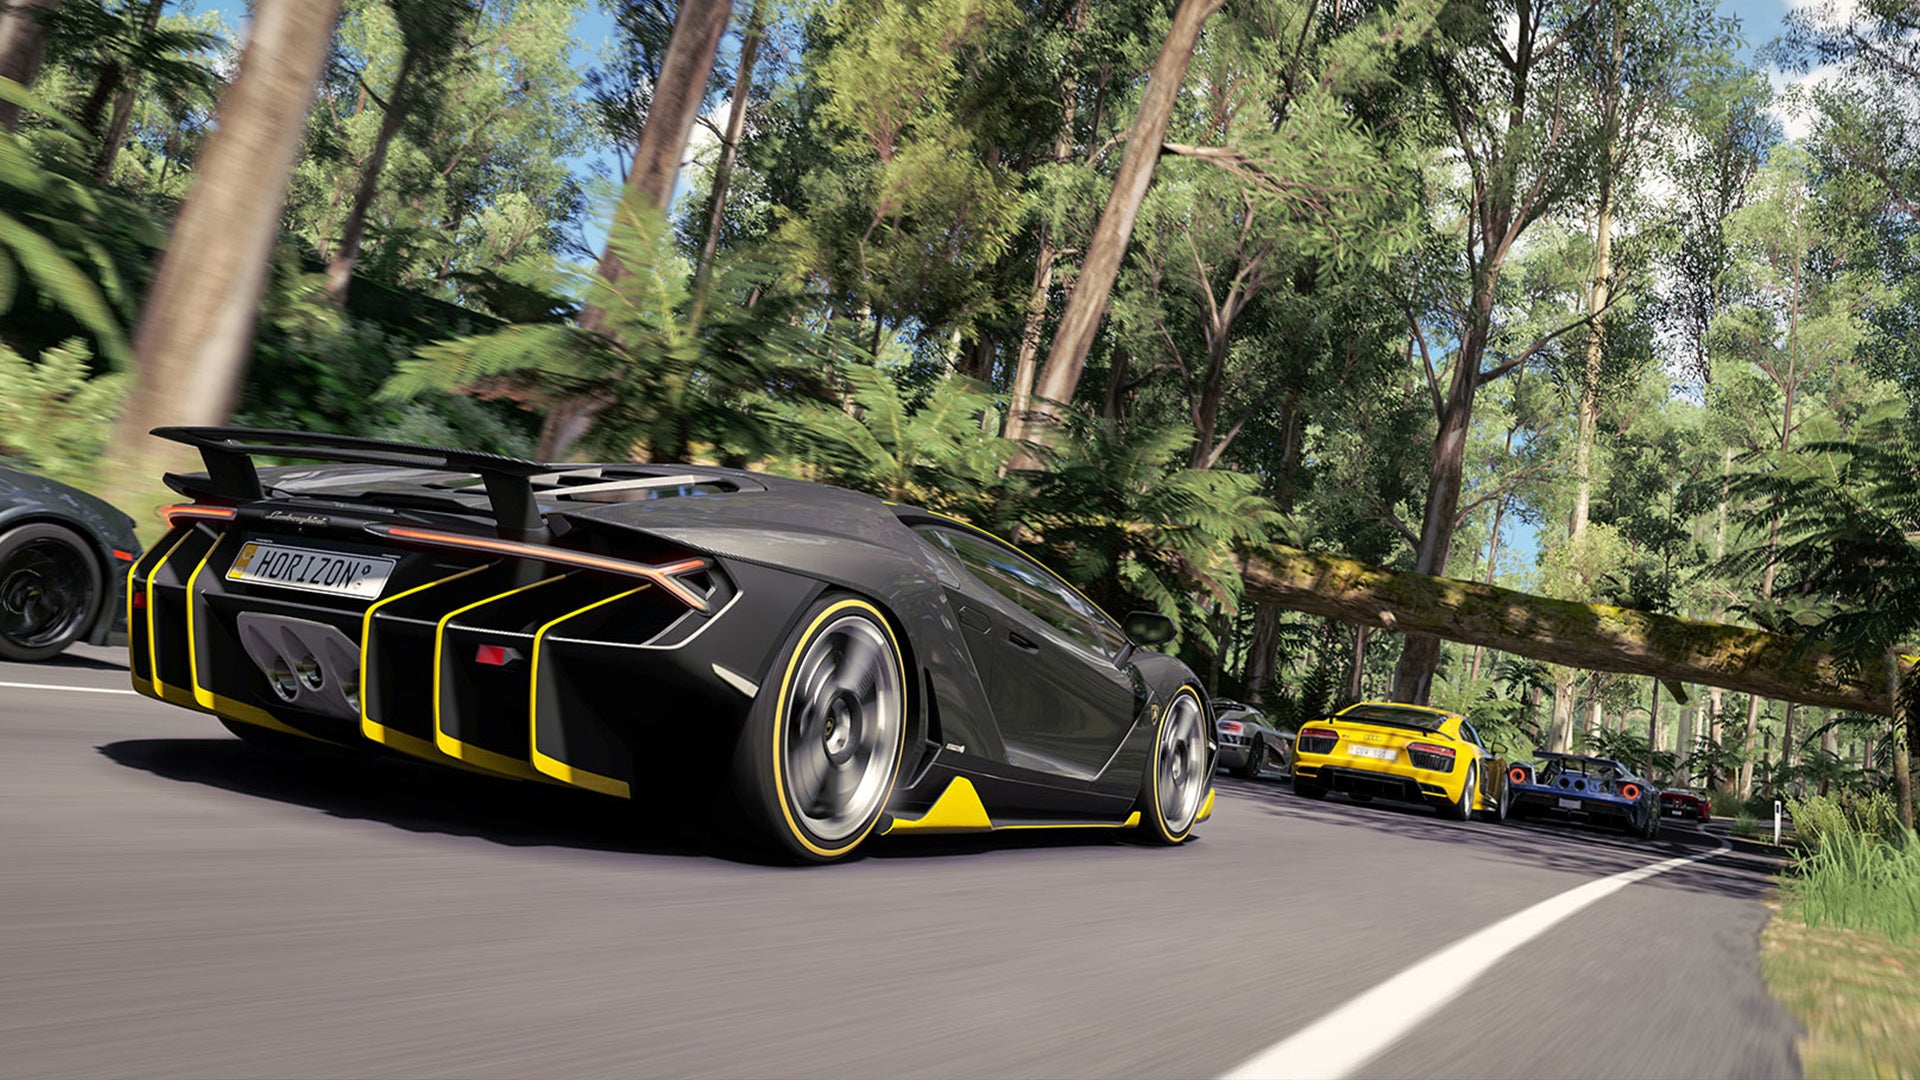 Image for Forza Horizon 3: Xbox One X vs PC Graphics Comparison + Frame-Rate Test